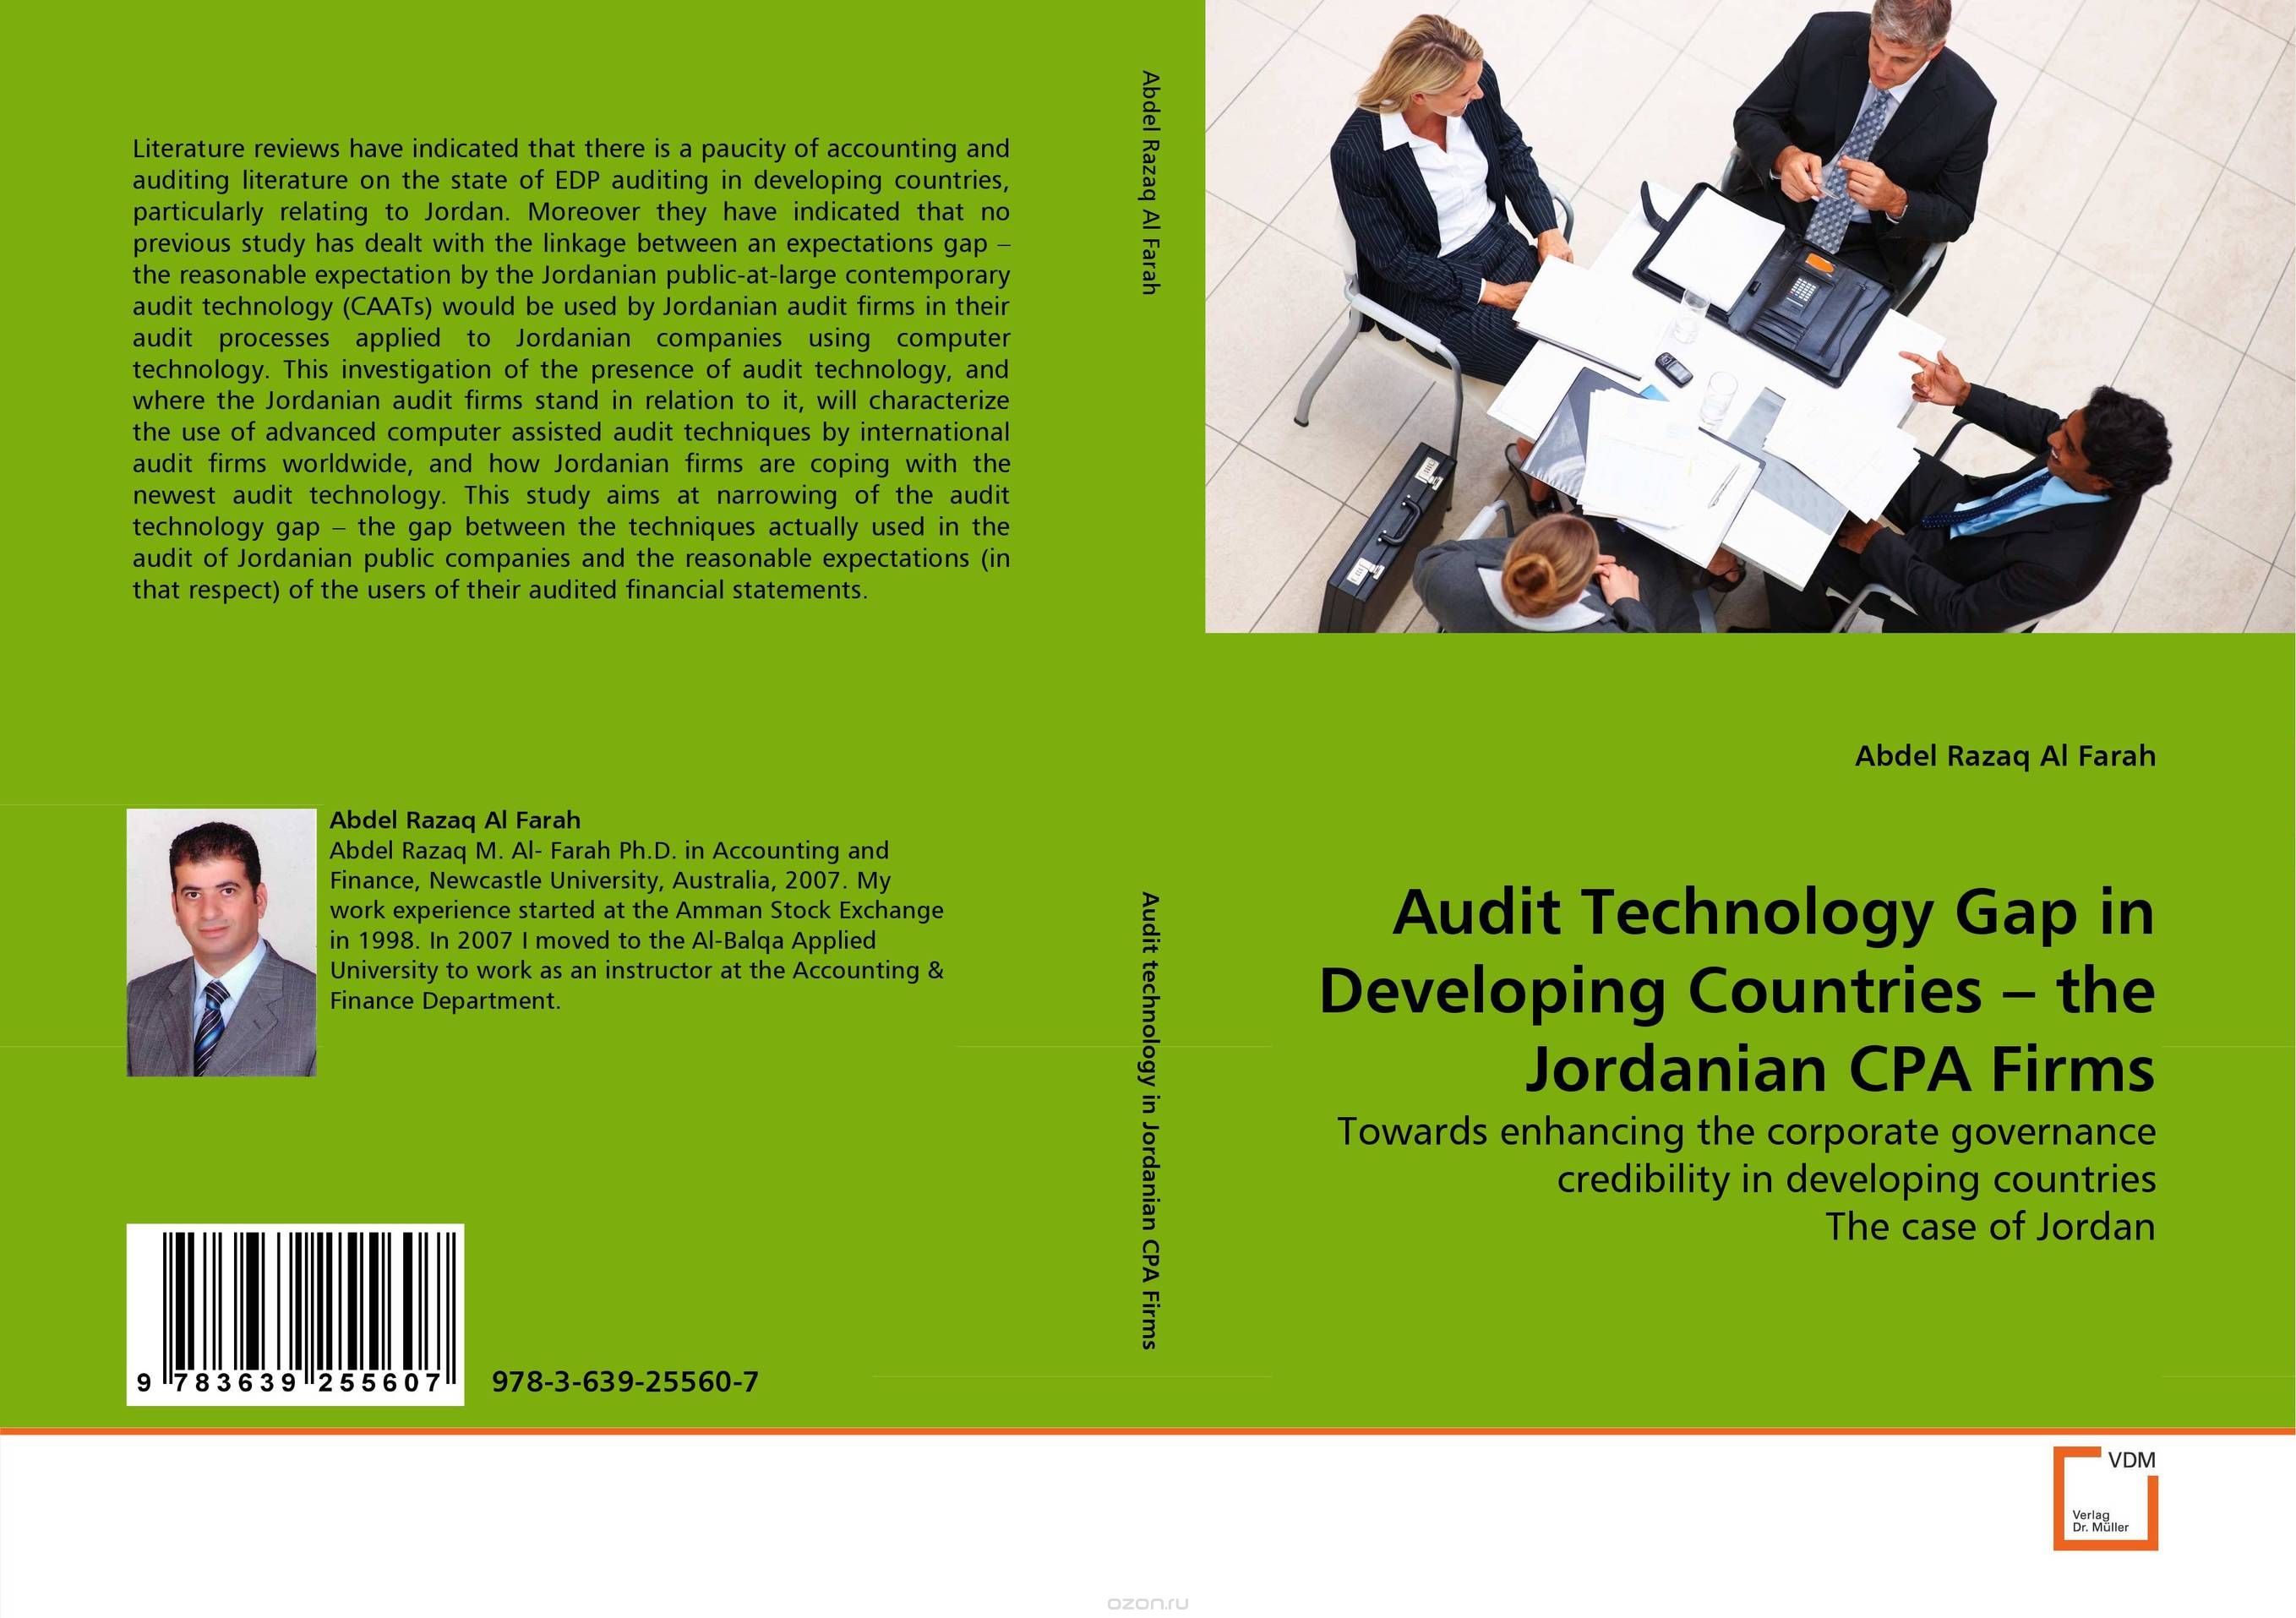 Audit Technology Gap in Developing Countries – the Jordanian CPA Firms